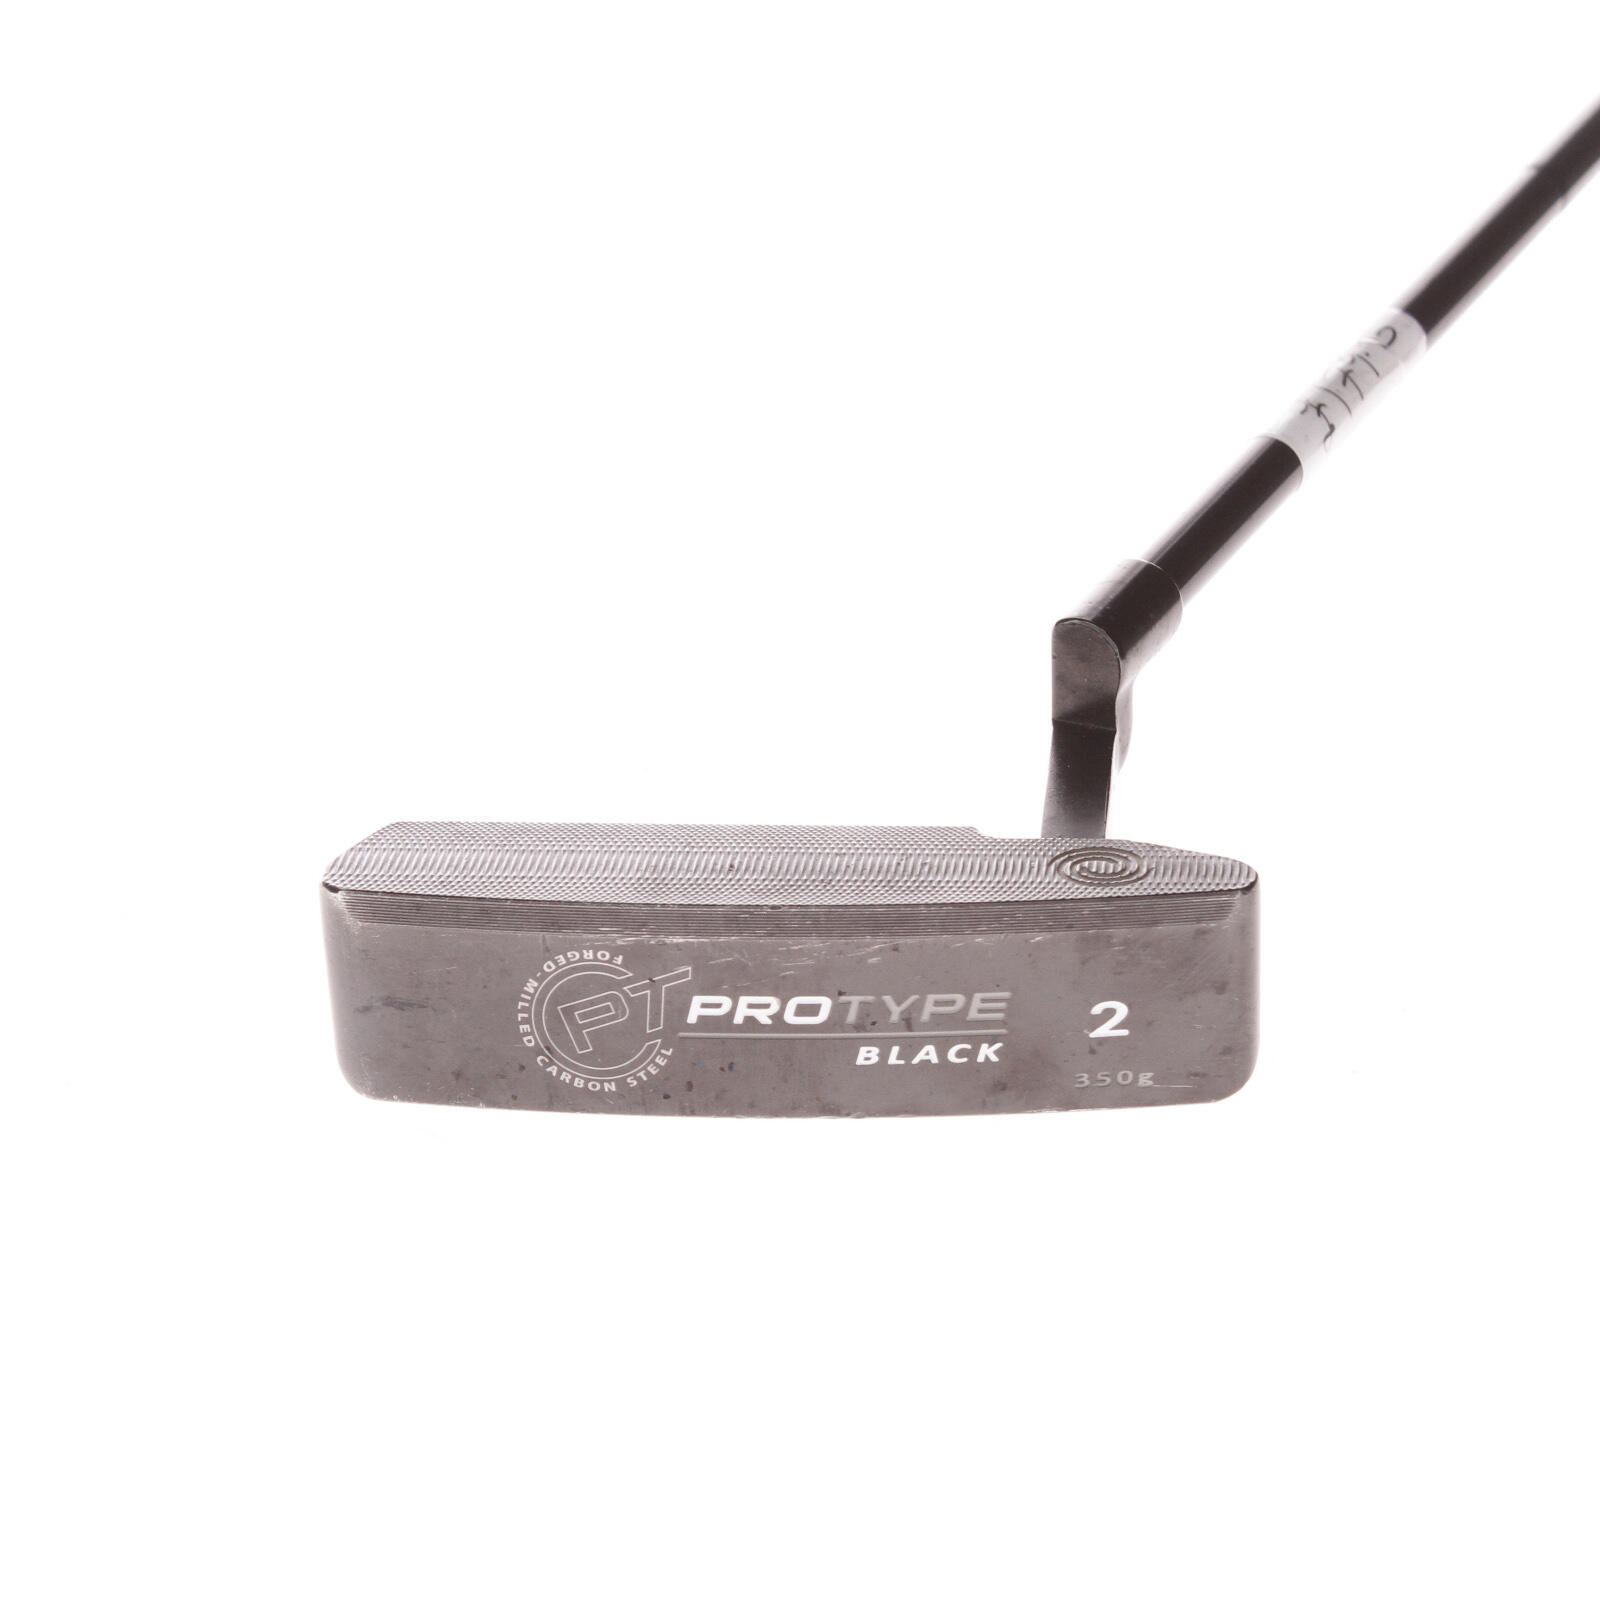 USED - Odyssey Pro Type 2 Putter 33 Inches Length Steel Right Handed - GRADE B 2/7